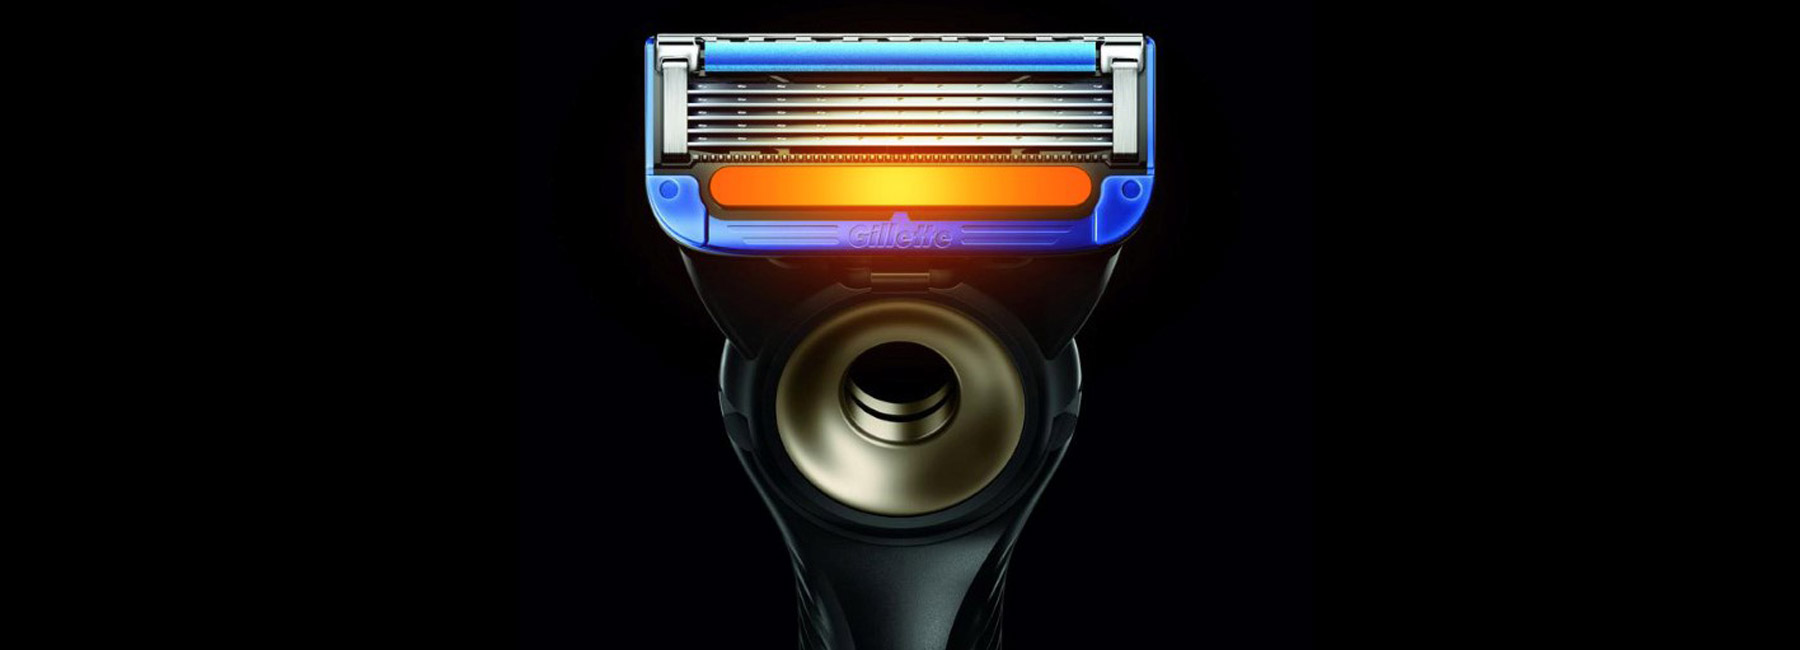 gillette-heated-razor-creates-the-comfort-of-a-hot-towel-with-every-stroke